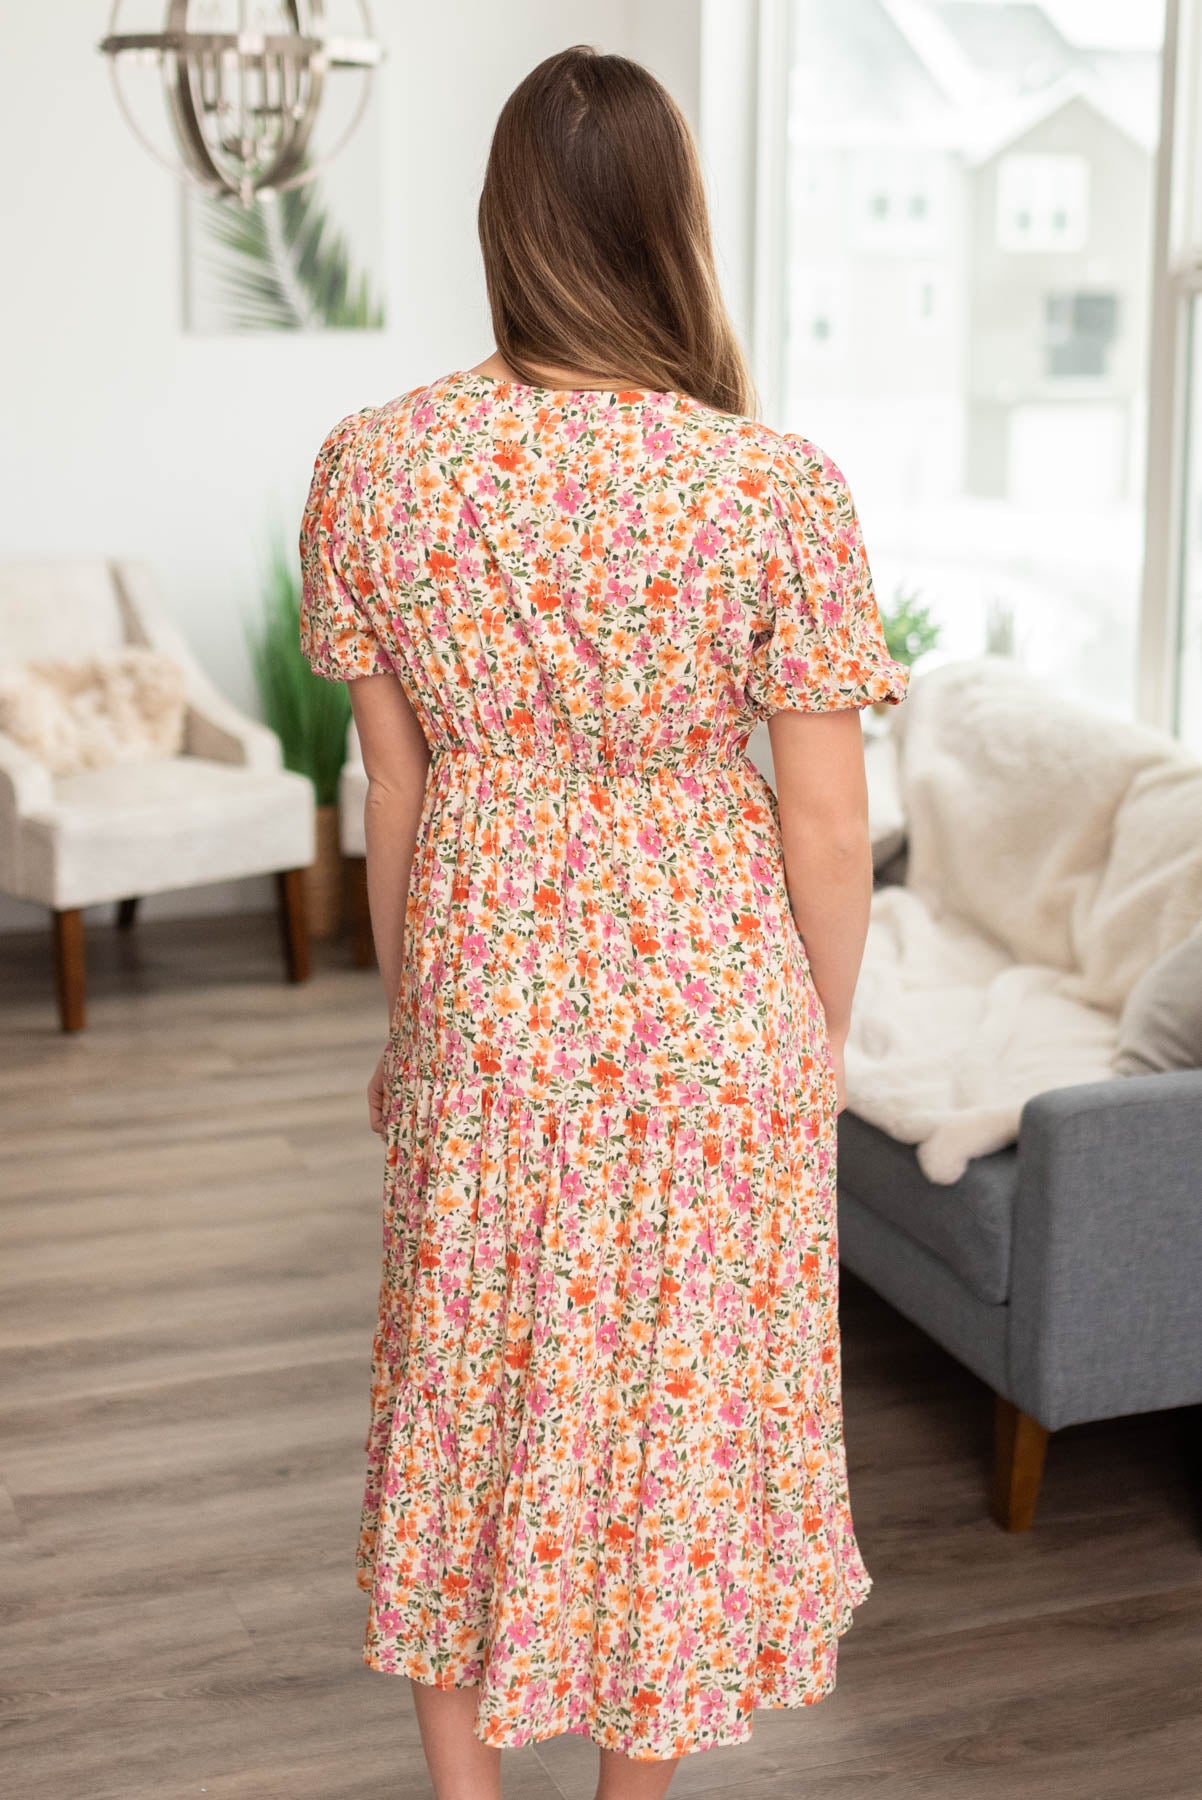 Back view of the apricot floral dress